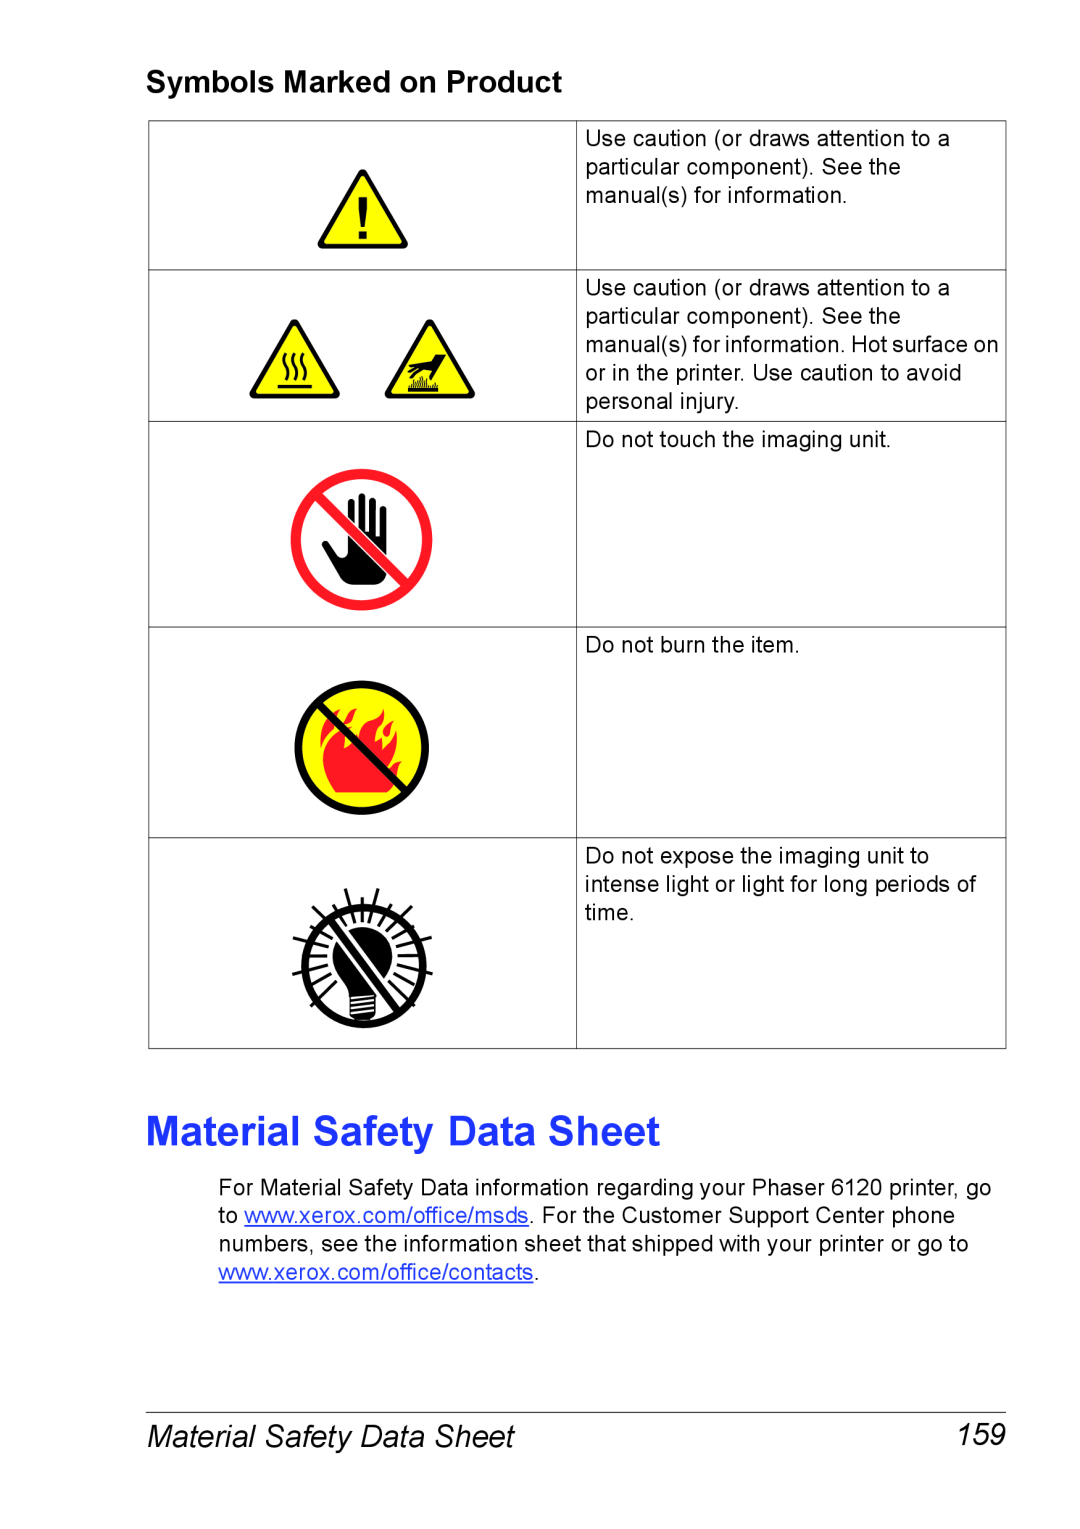 Xerox 6120 manual Material Safety Data Sheet, Symbols Marked on Product 